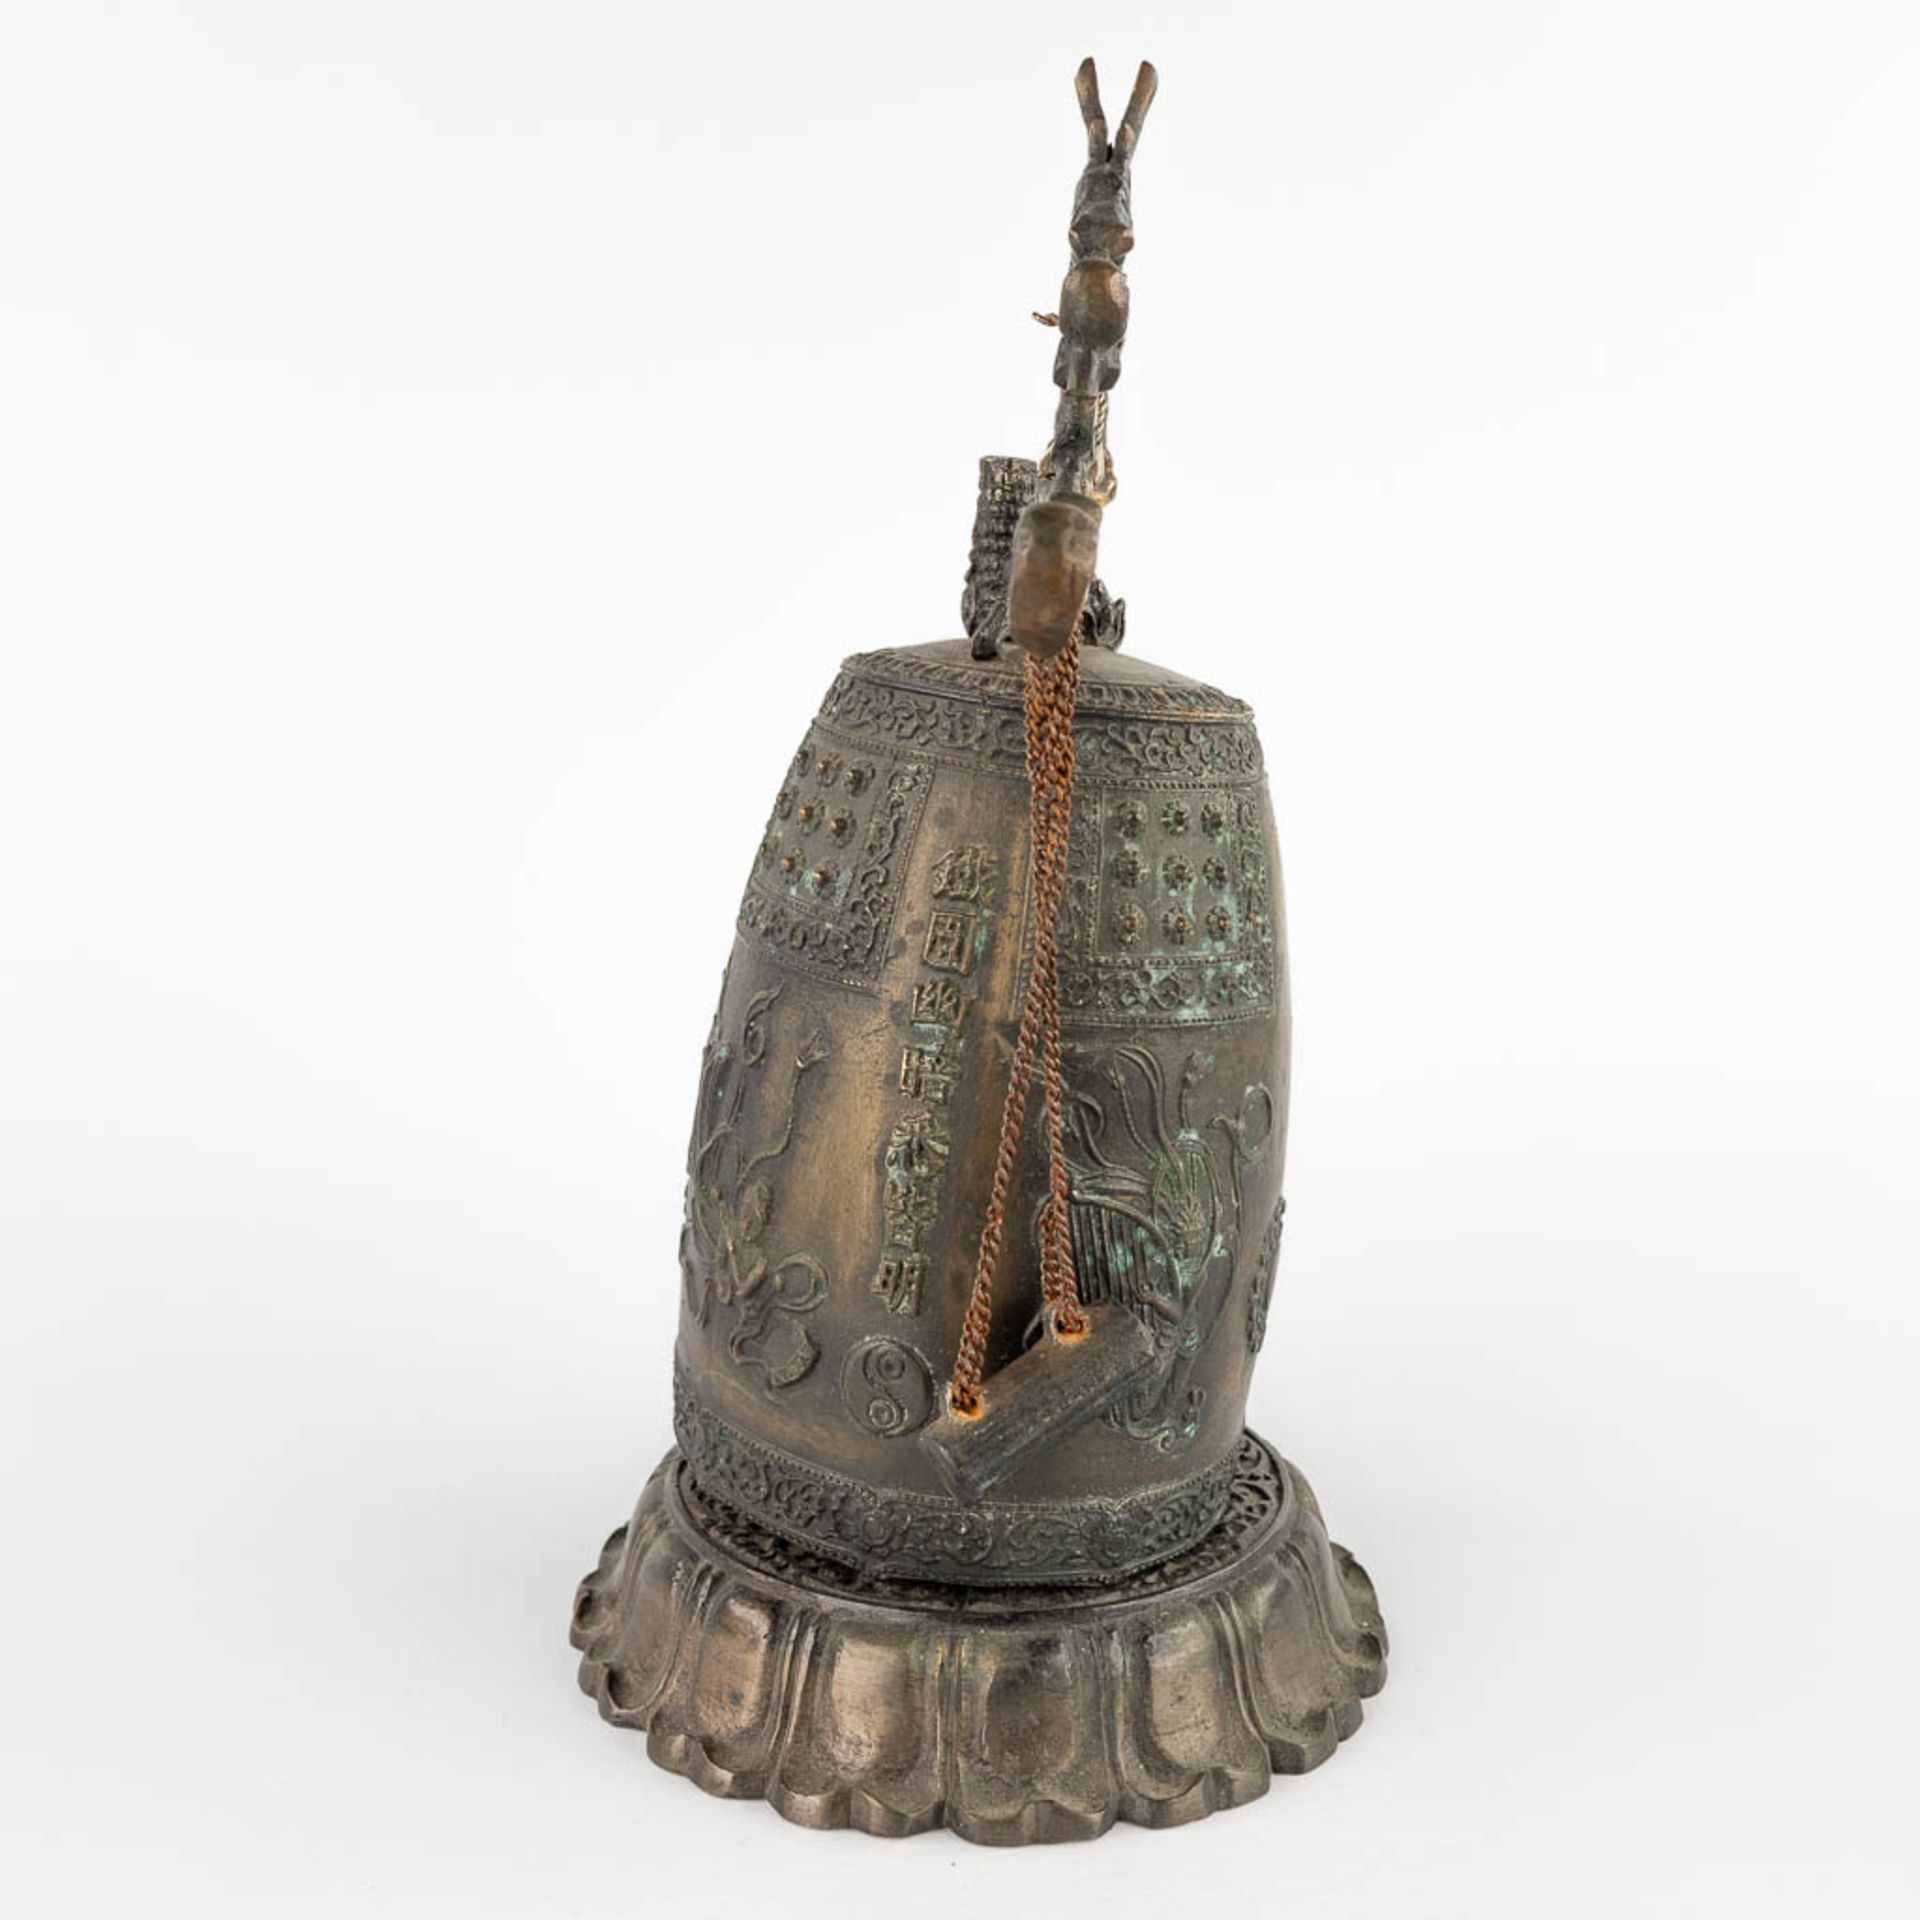 3 bells and a gong, Oriental. 19th/20th C. (L:13 x W:47 x H:55 cm) - Image 15 of 28